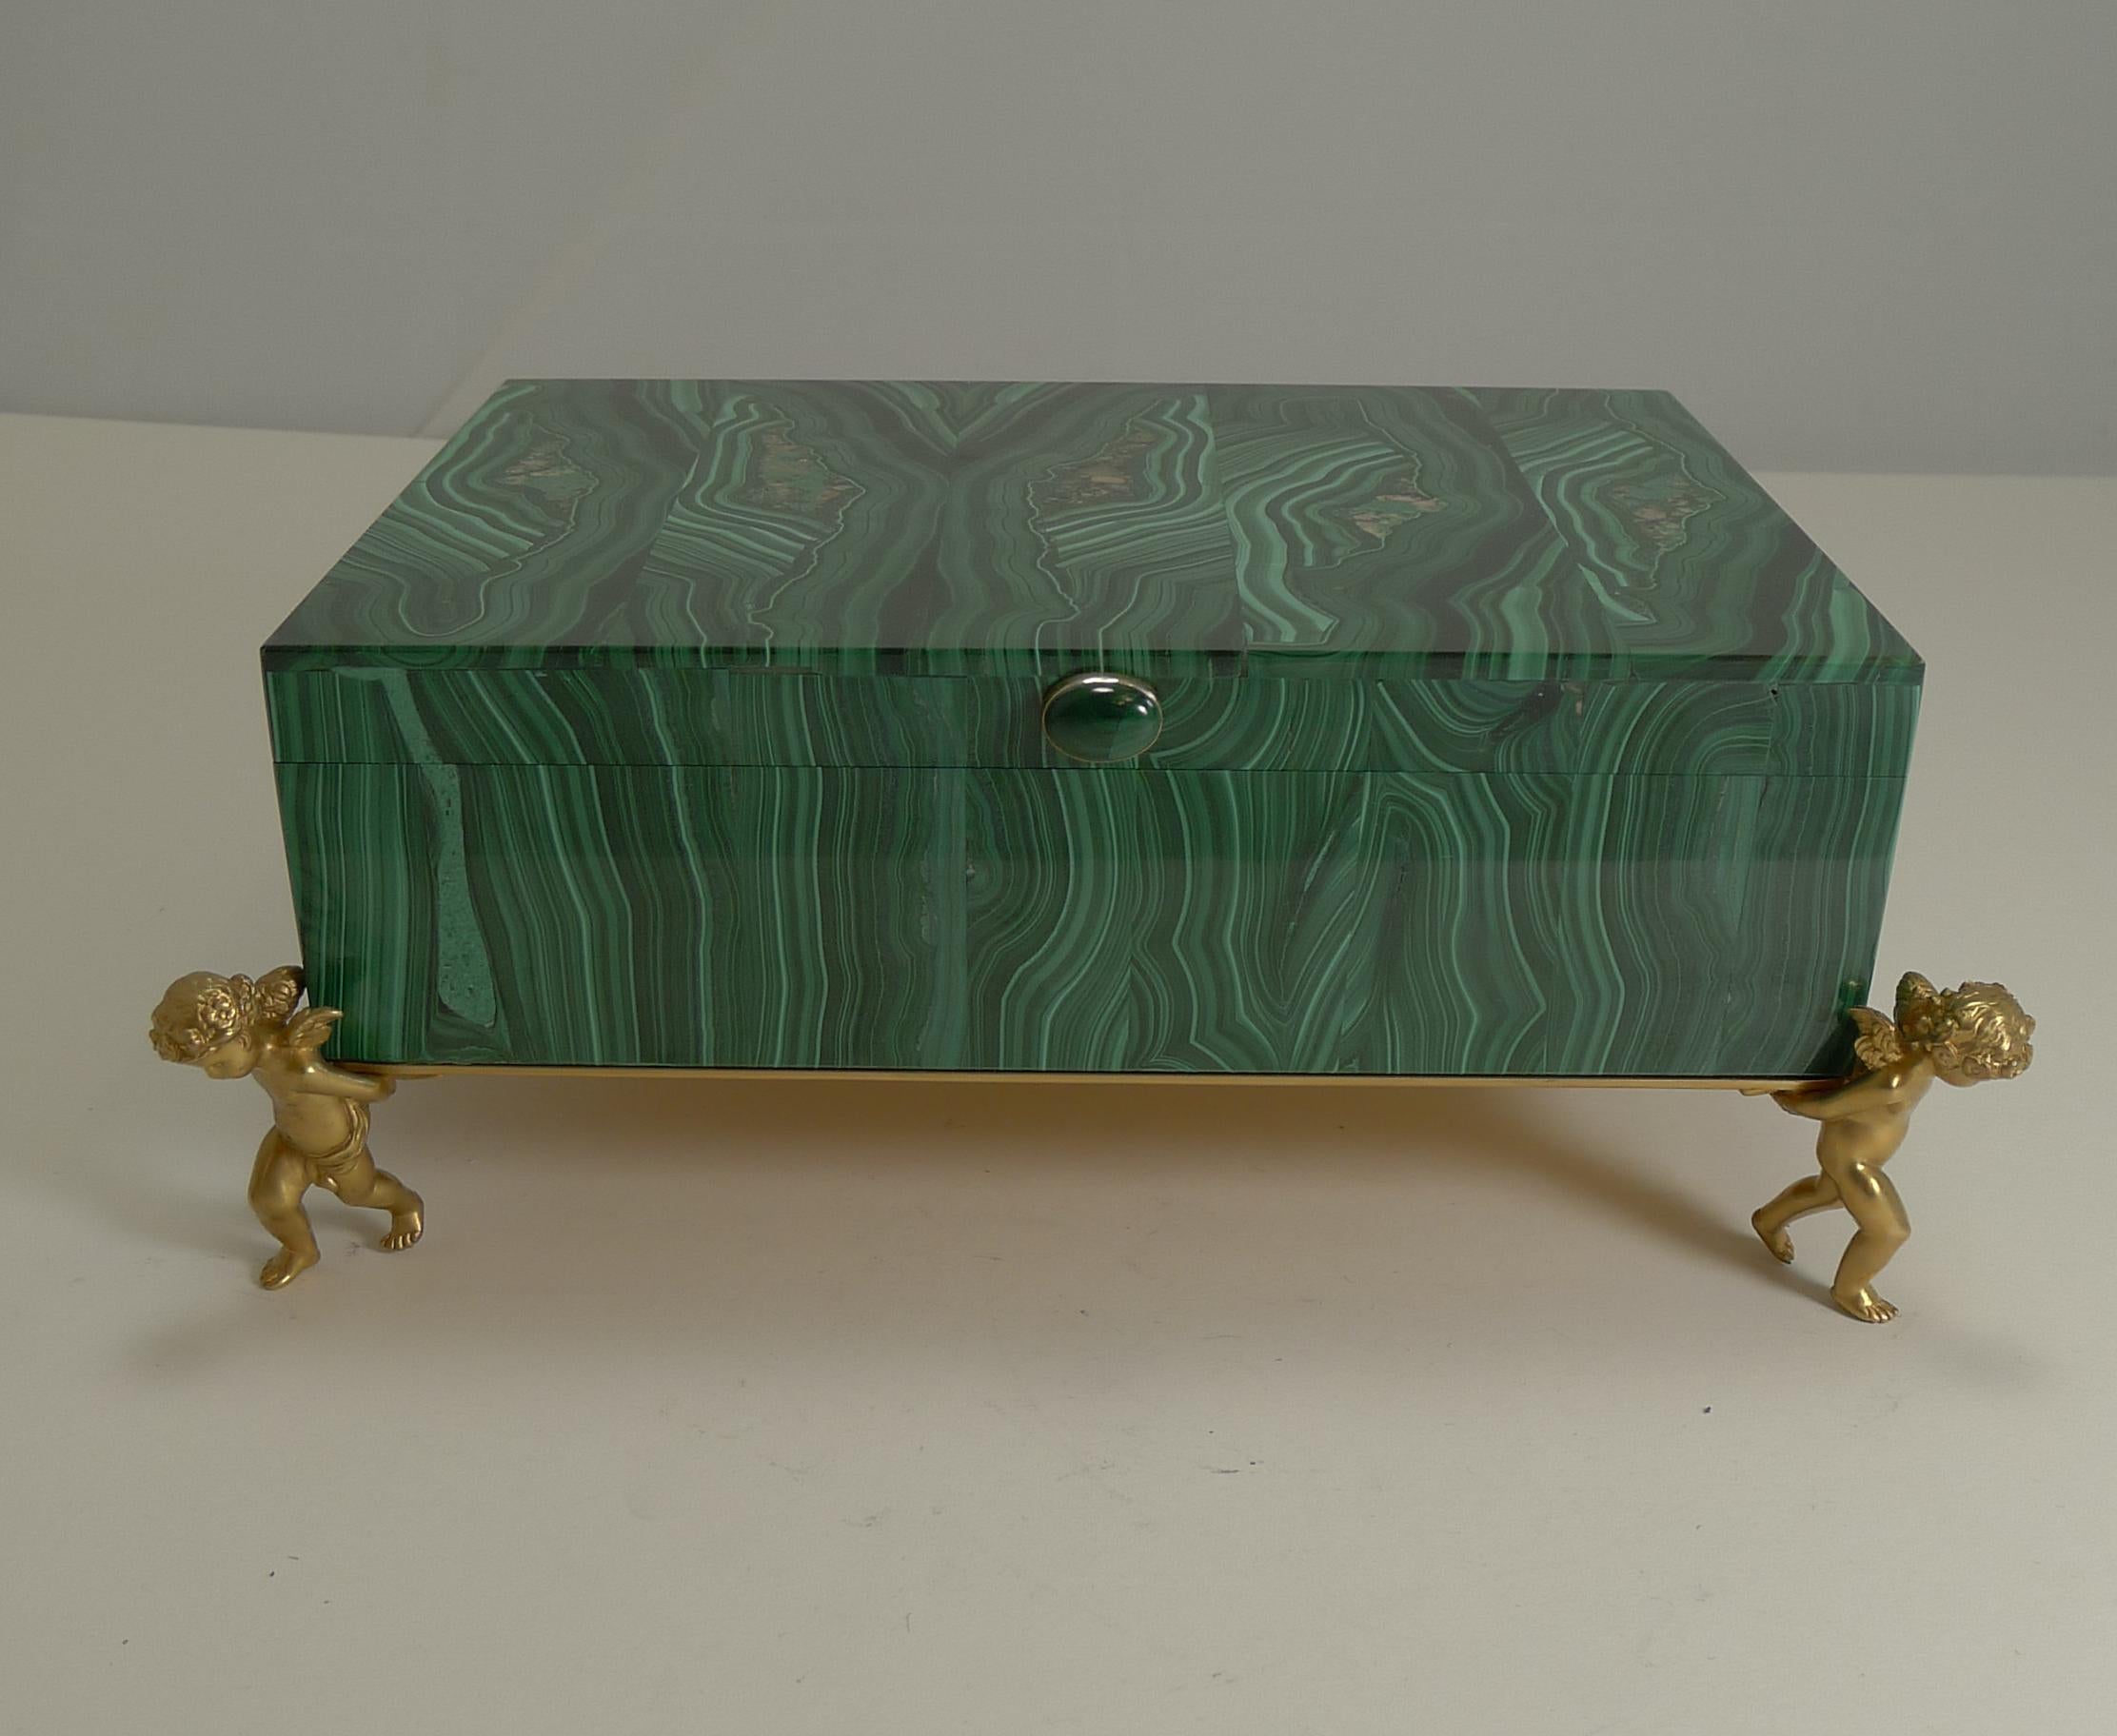 An absolute gem of a box, vintage in era dating to the mid-20th century and in superb condition, a truly magical jewelry box.

Highly graphic in the juxtaposition of malachite sections to create this high-quality intarsia. Fabricated in Russia of